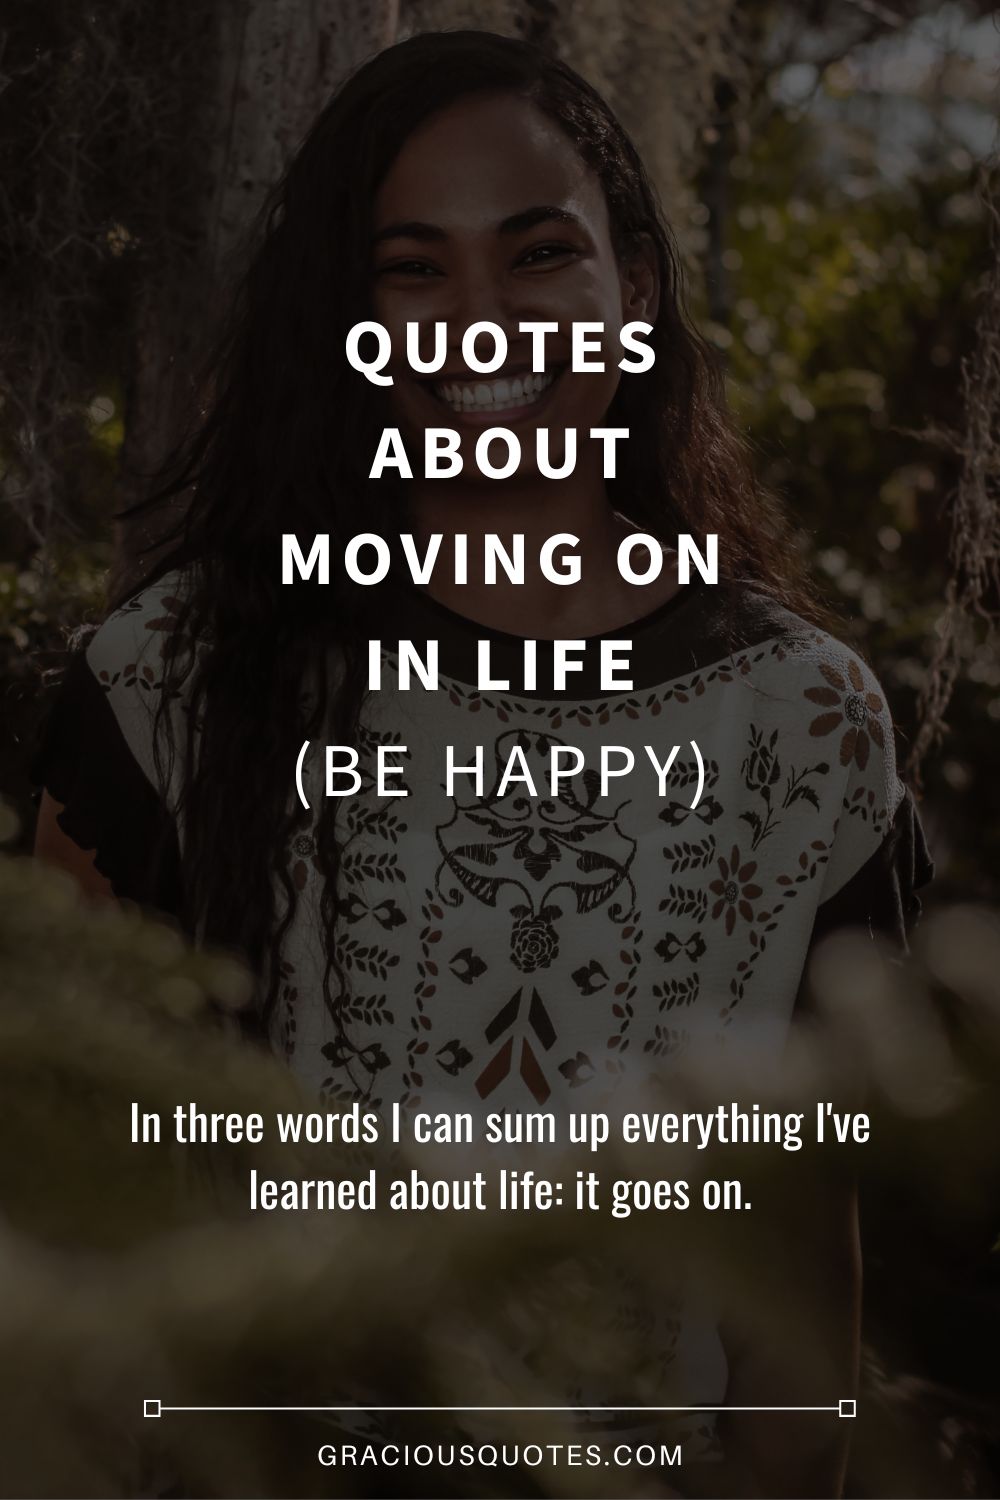 Quotes About Moving On in Life (BE HAPPY) - Gracious Quotes